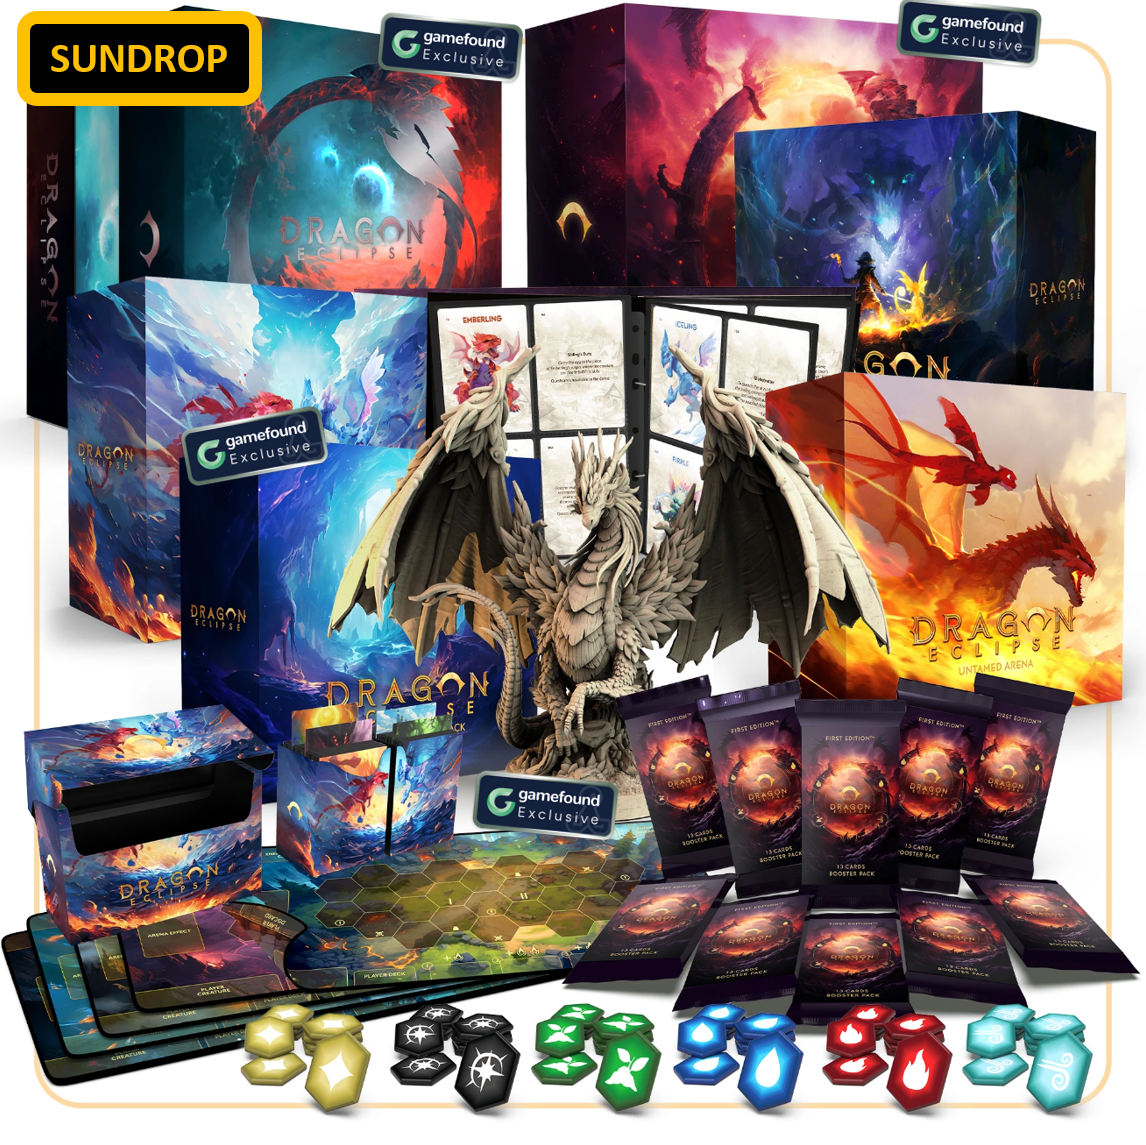 Gamefound Exclusive Dragon Eclipse Board Game Collector's Edition, Sundrop Edition